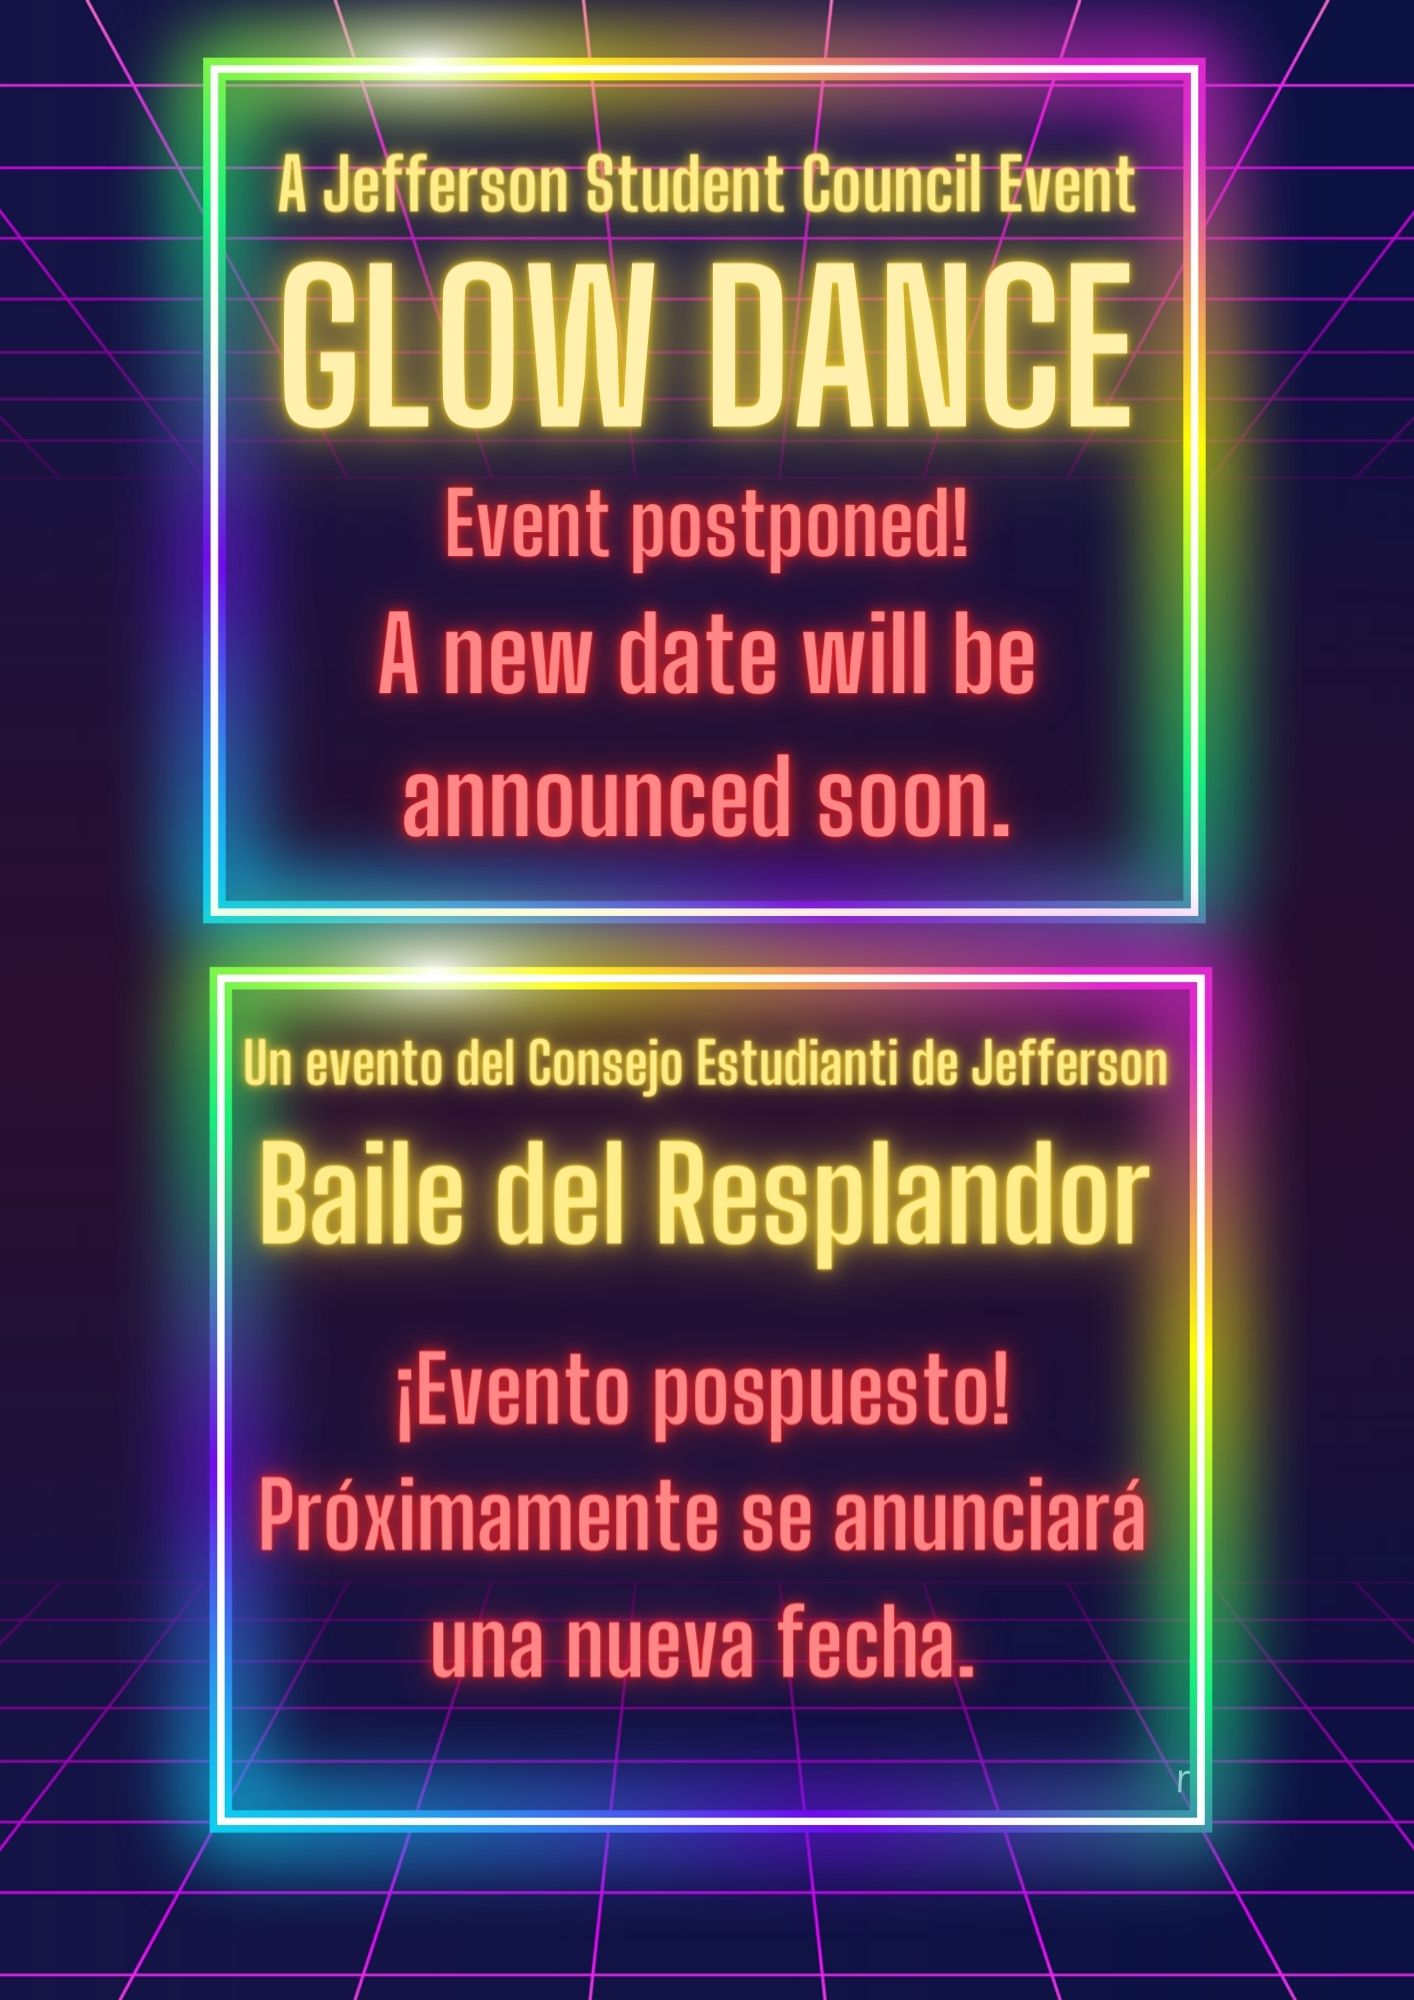 Announcement of Jefferson Student Council Glow Dance being postponed.